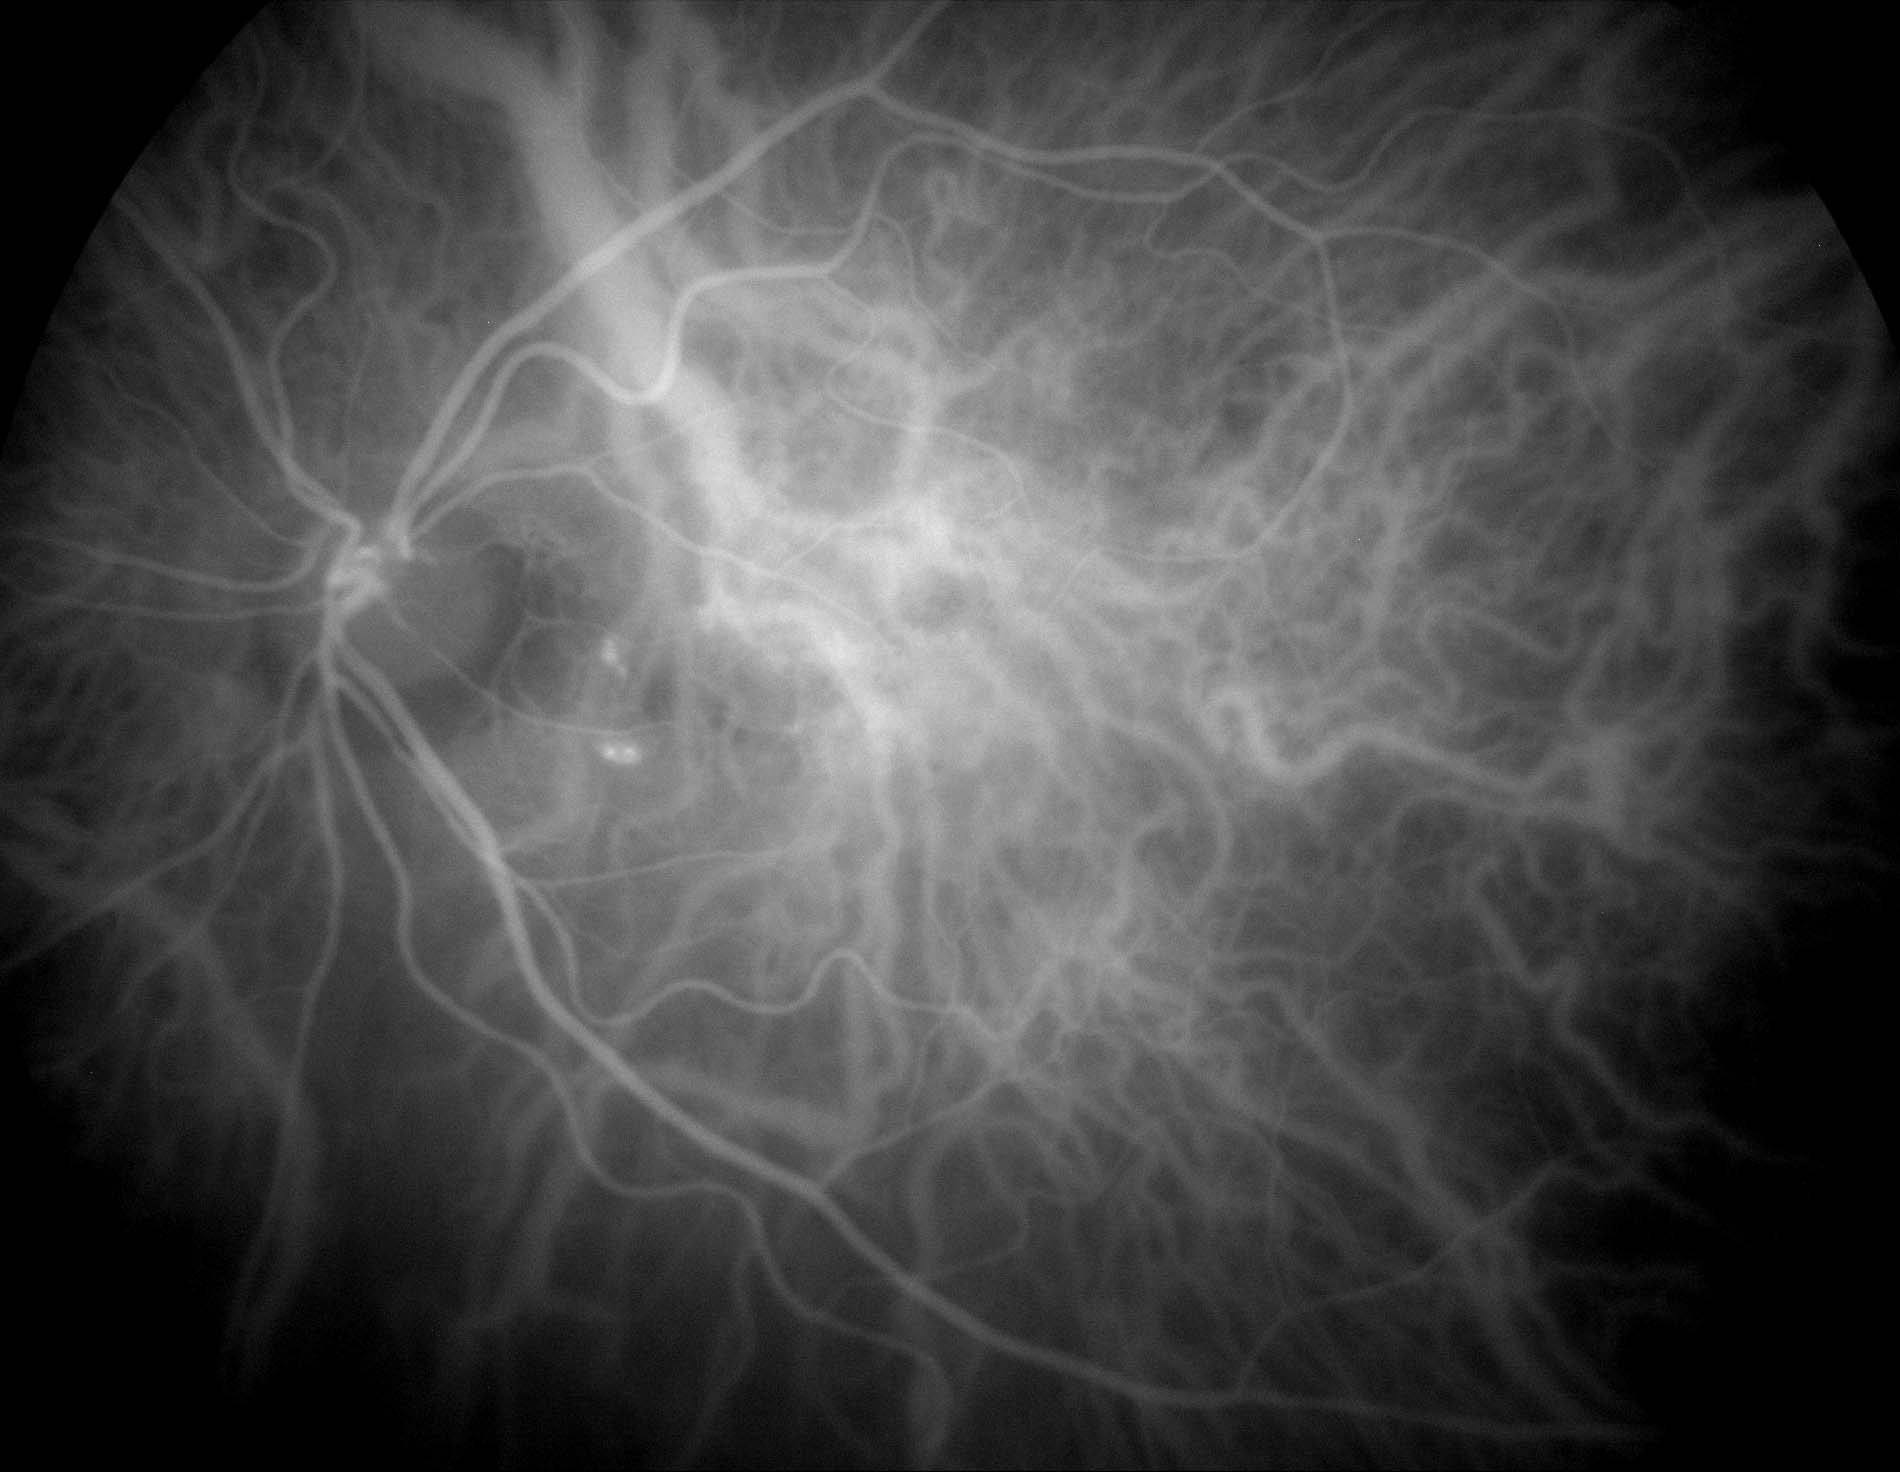 Indocyanine Green Angiography